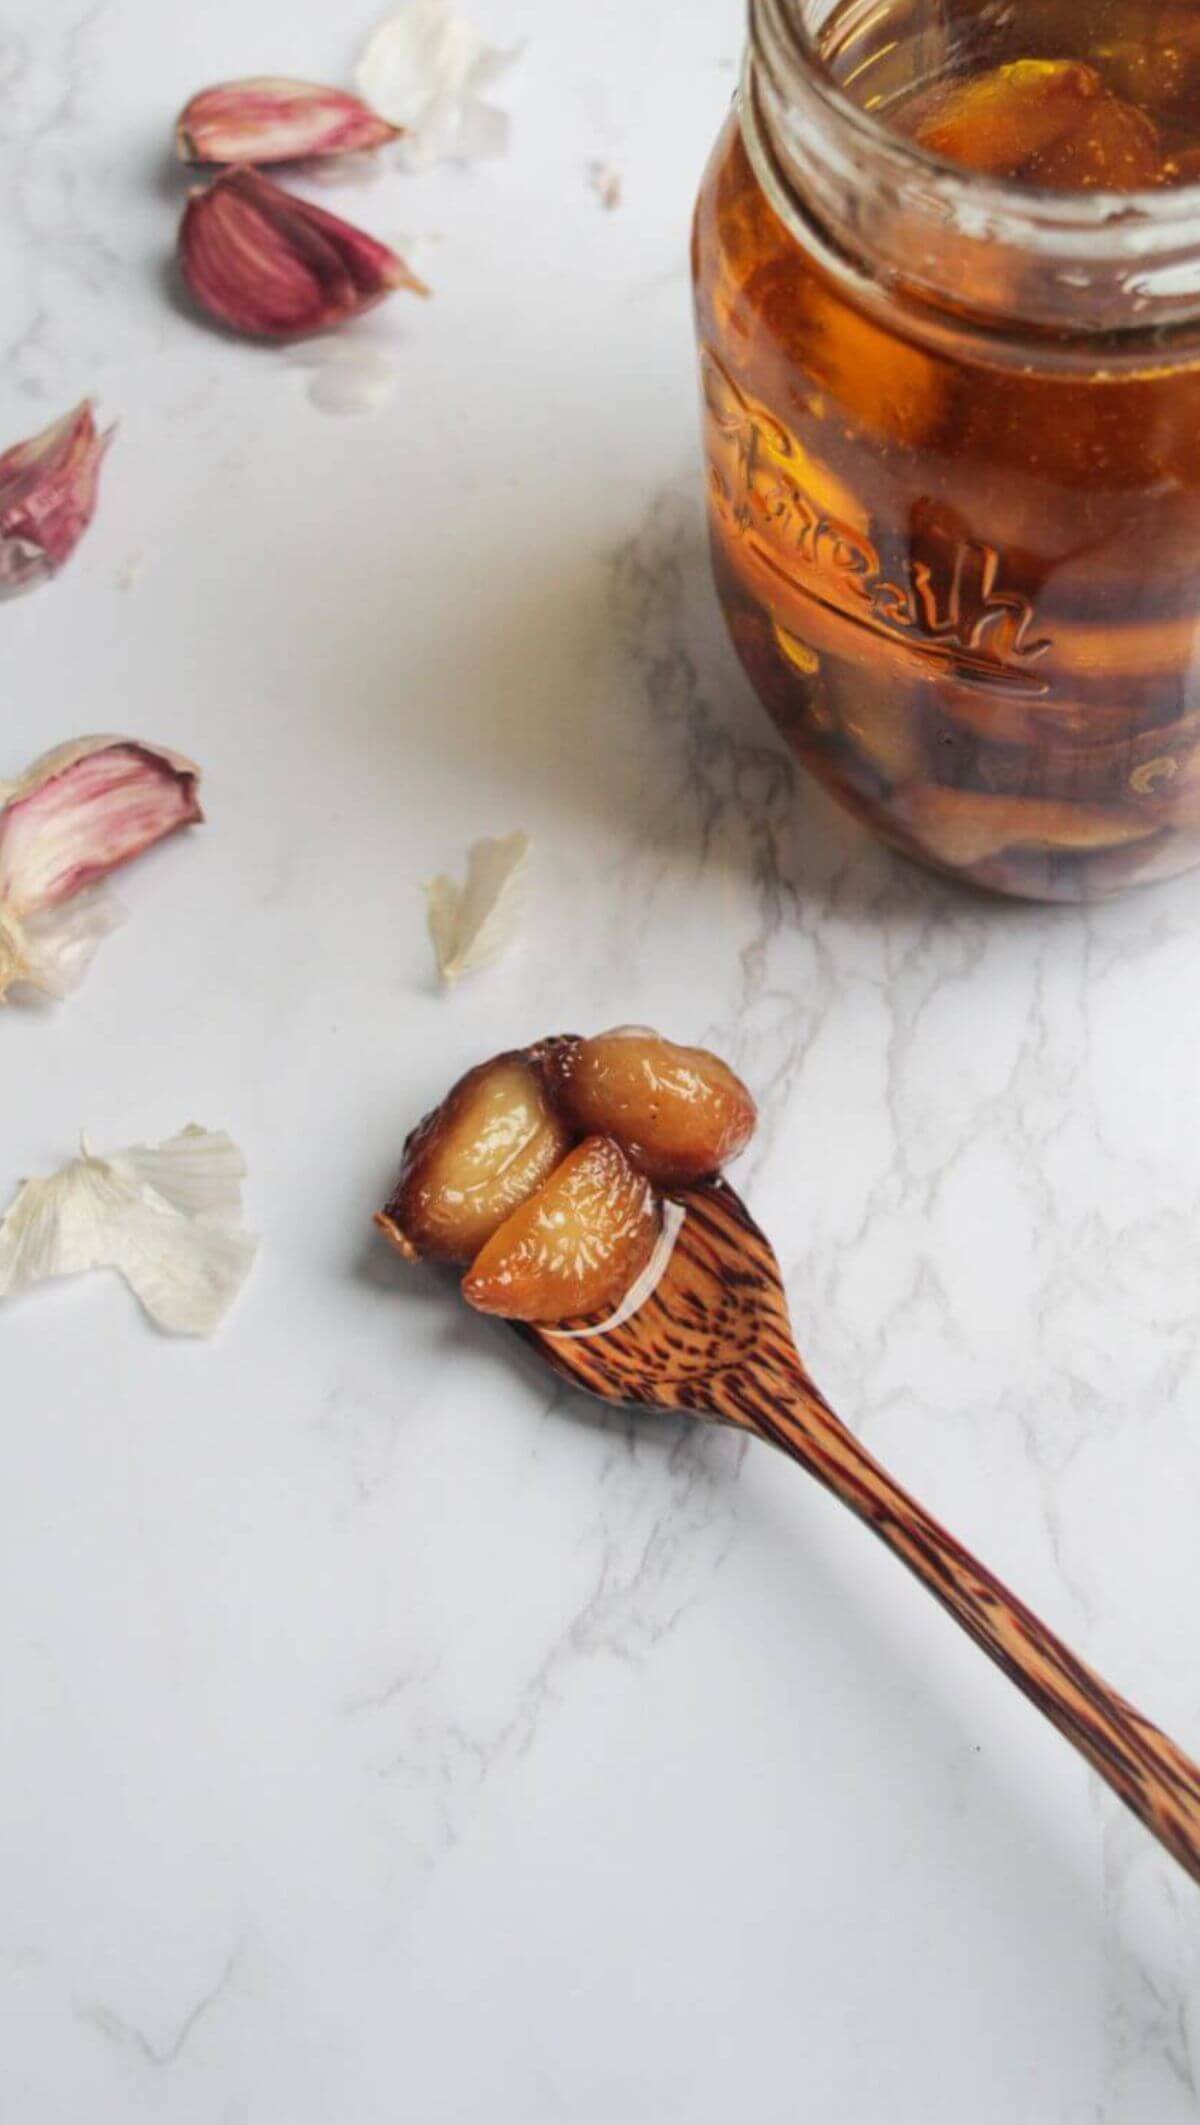 Garlic confit cloves on a wooden spoon on a white marble background, with a jar of garlic confit behind.